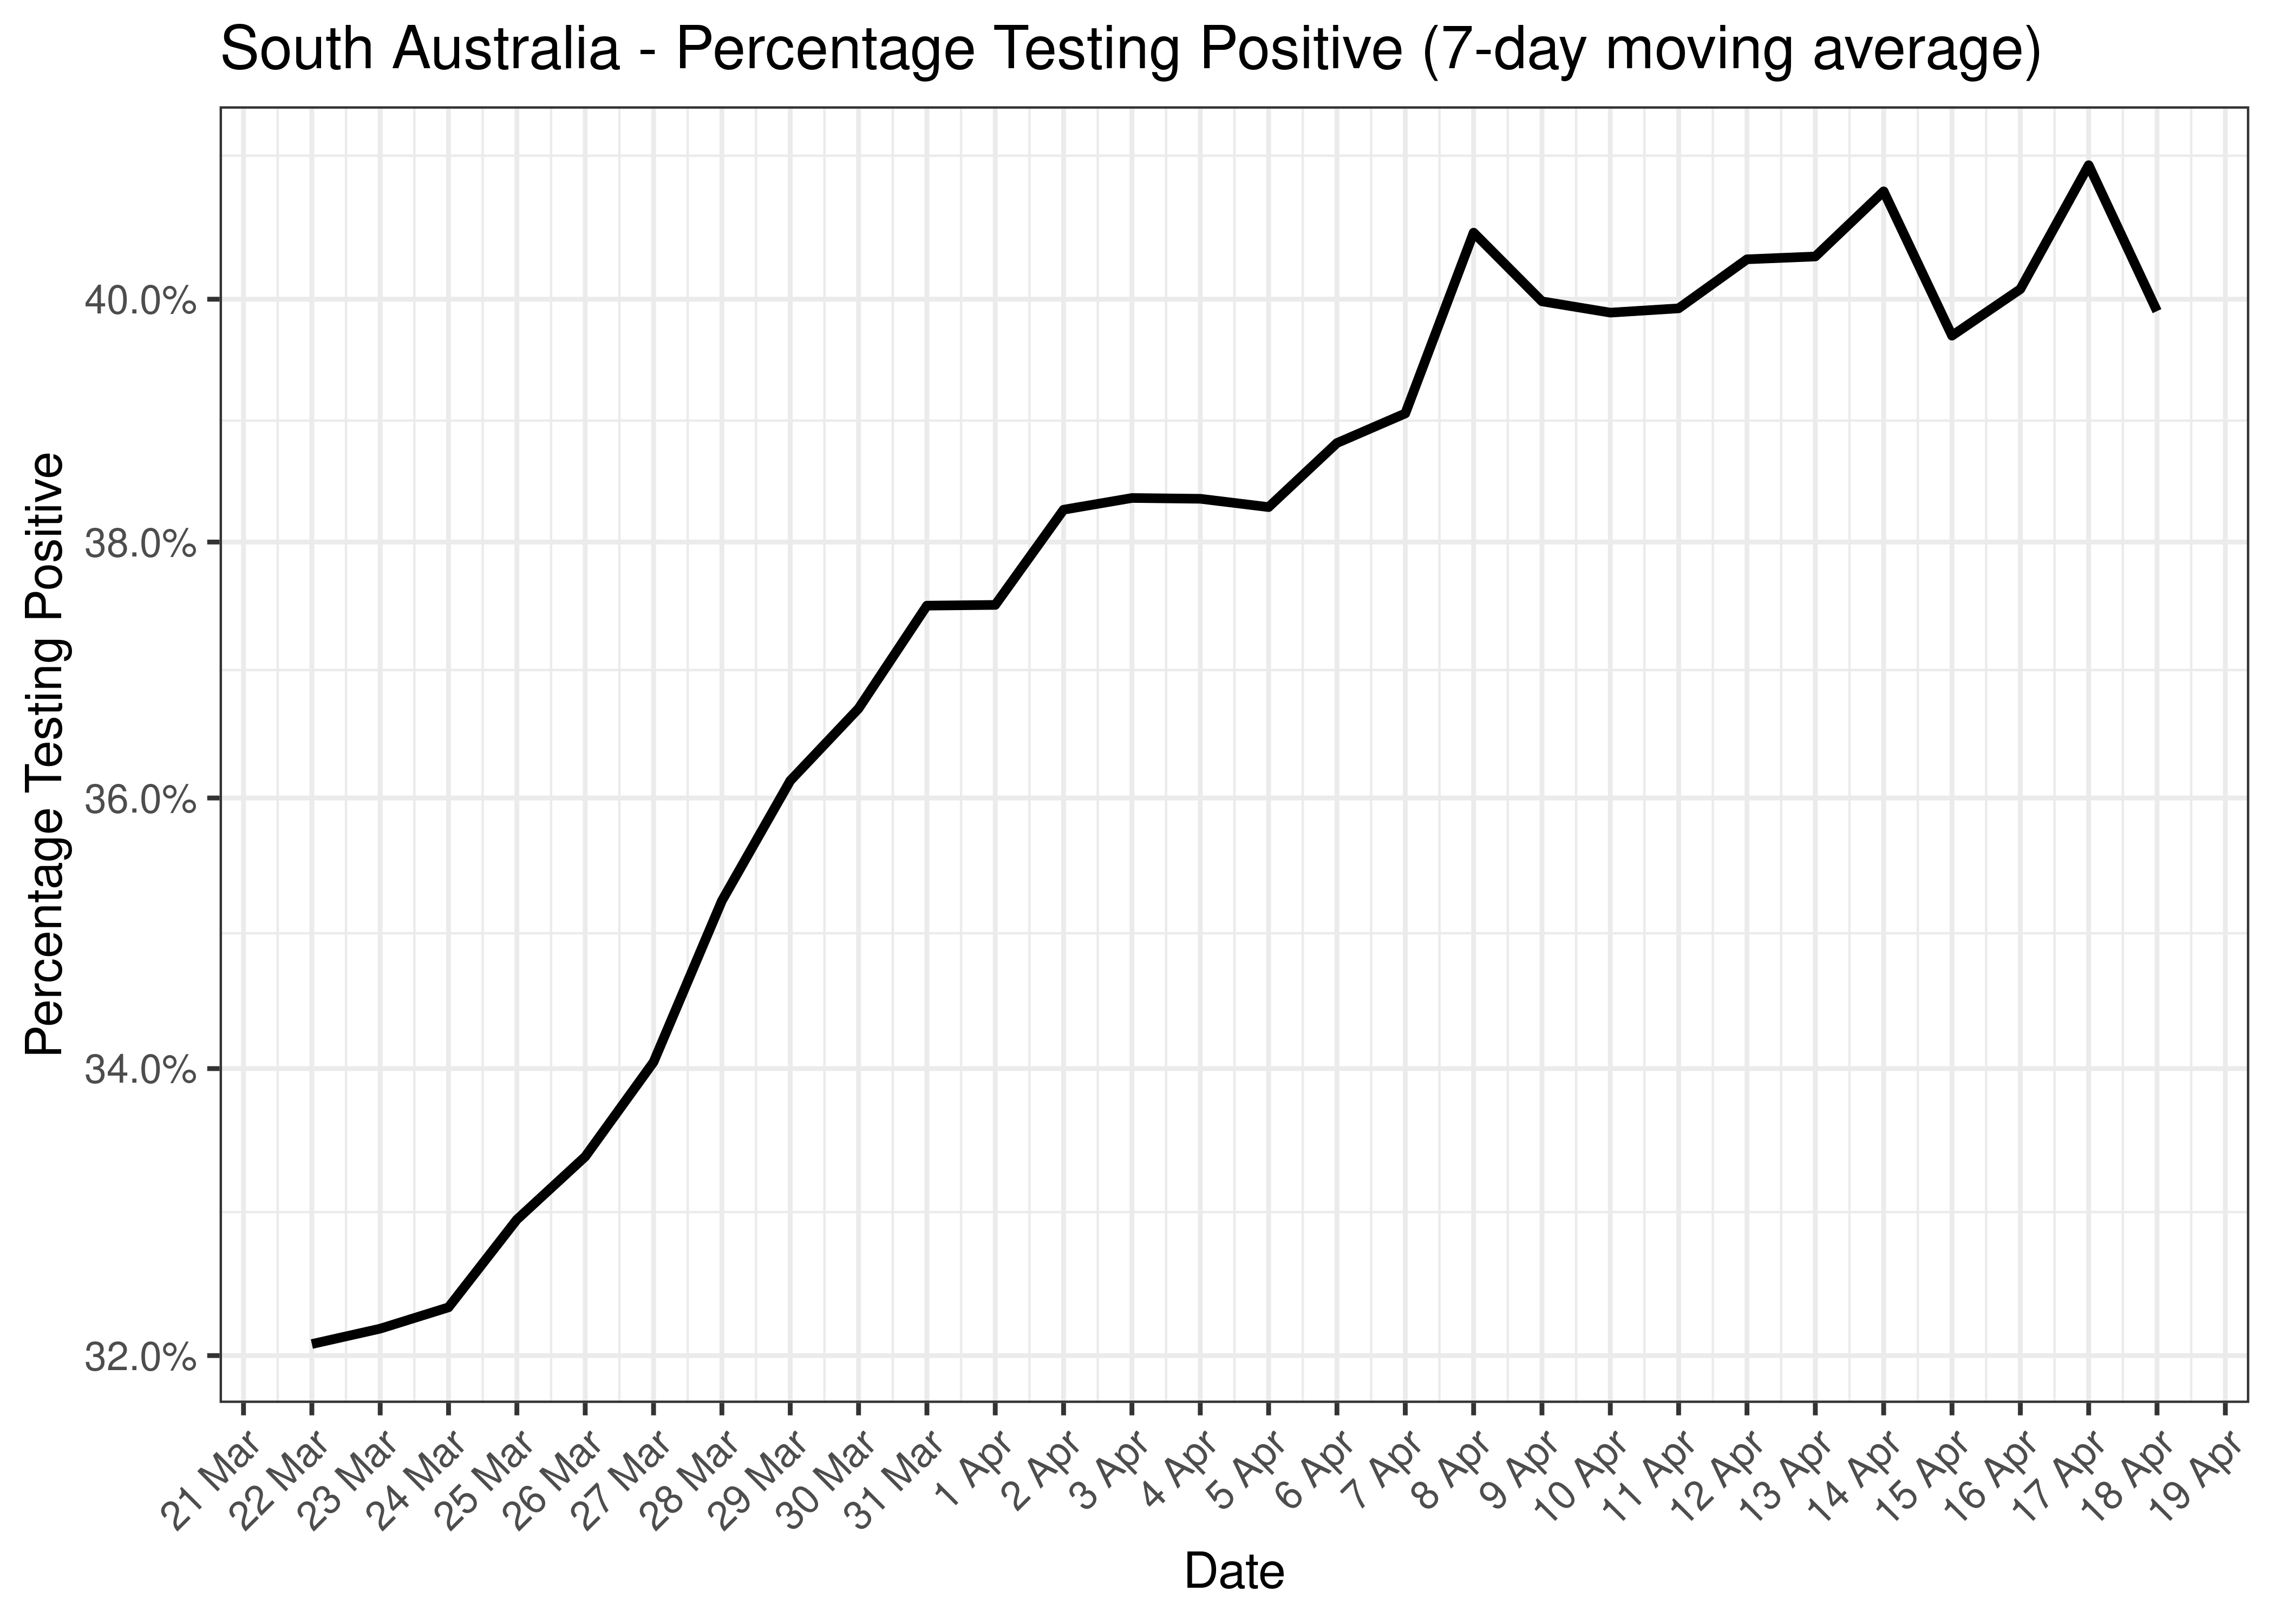 South Australia - Percentage Testing Positive for Last 30 Days (7-day moving average)